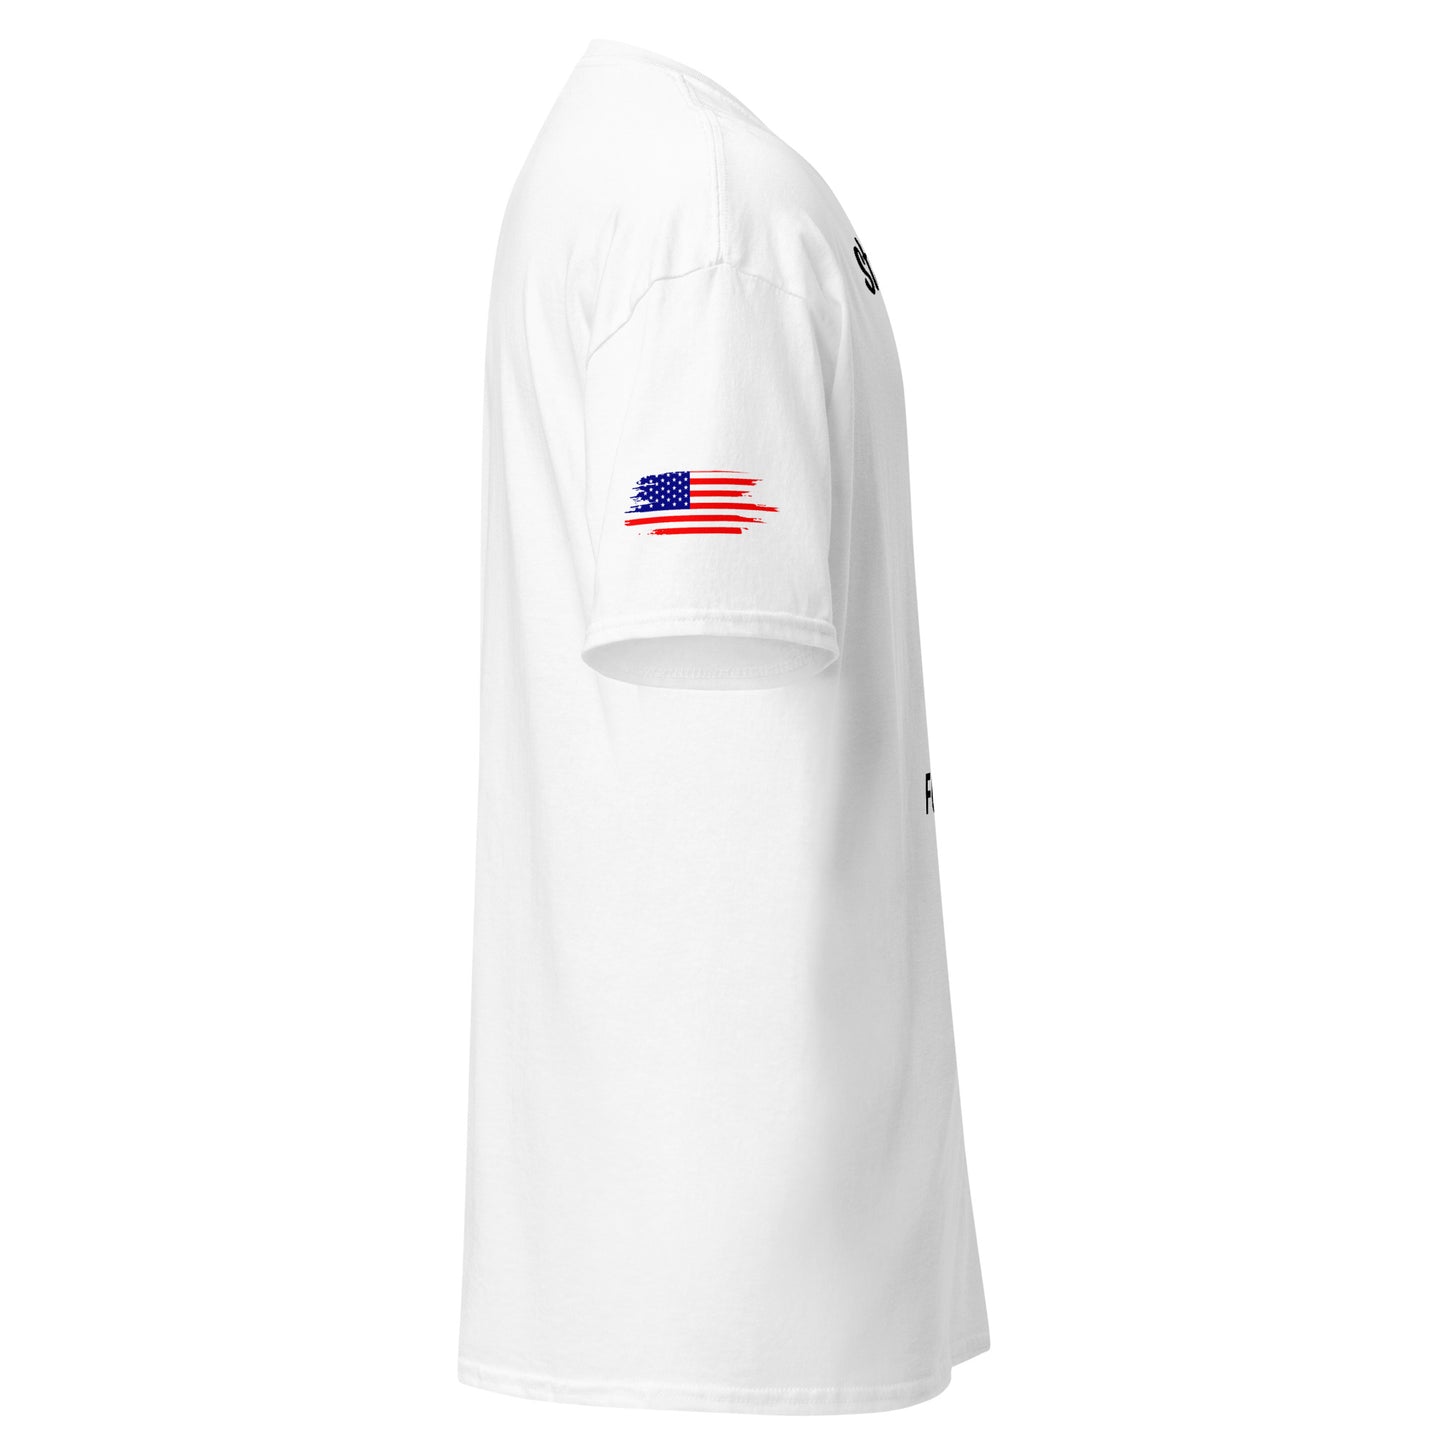 Stars and Stripes forever - Men's classic tee